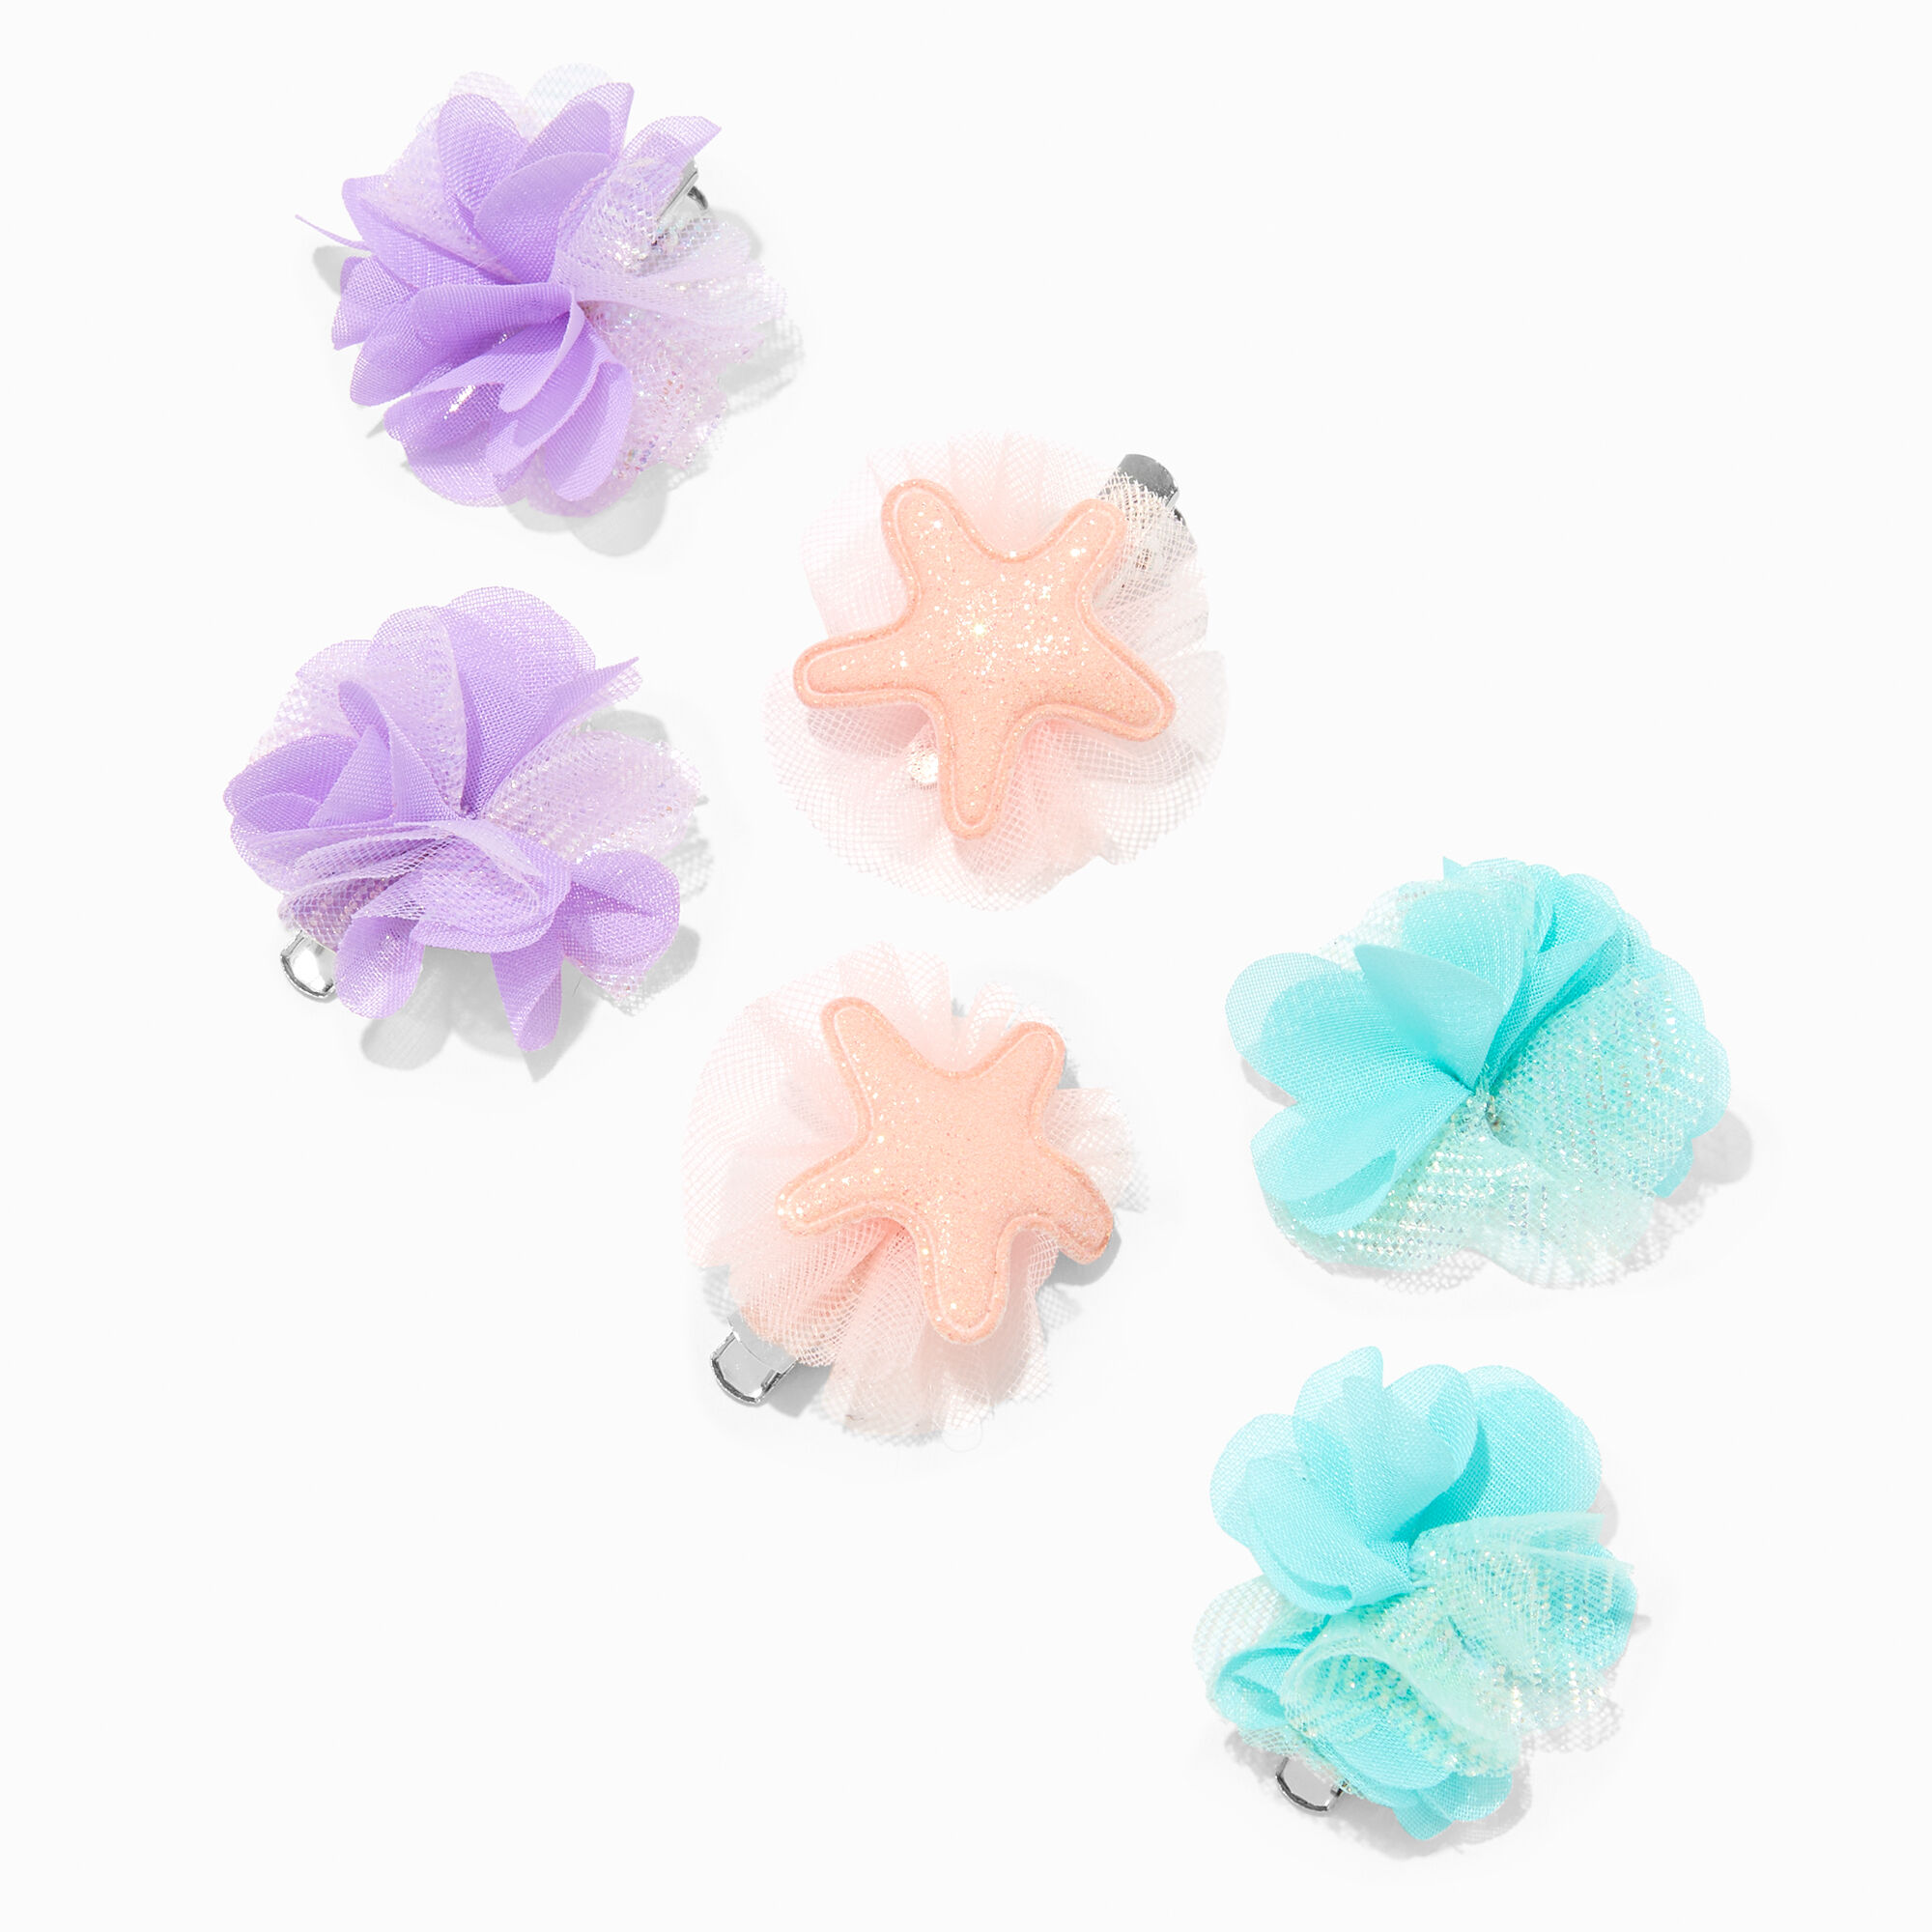 View Claires Club Mermaid Chiffon Hair Clips 6 Pack information